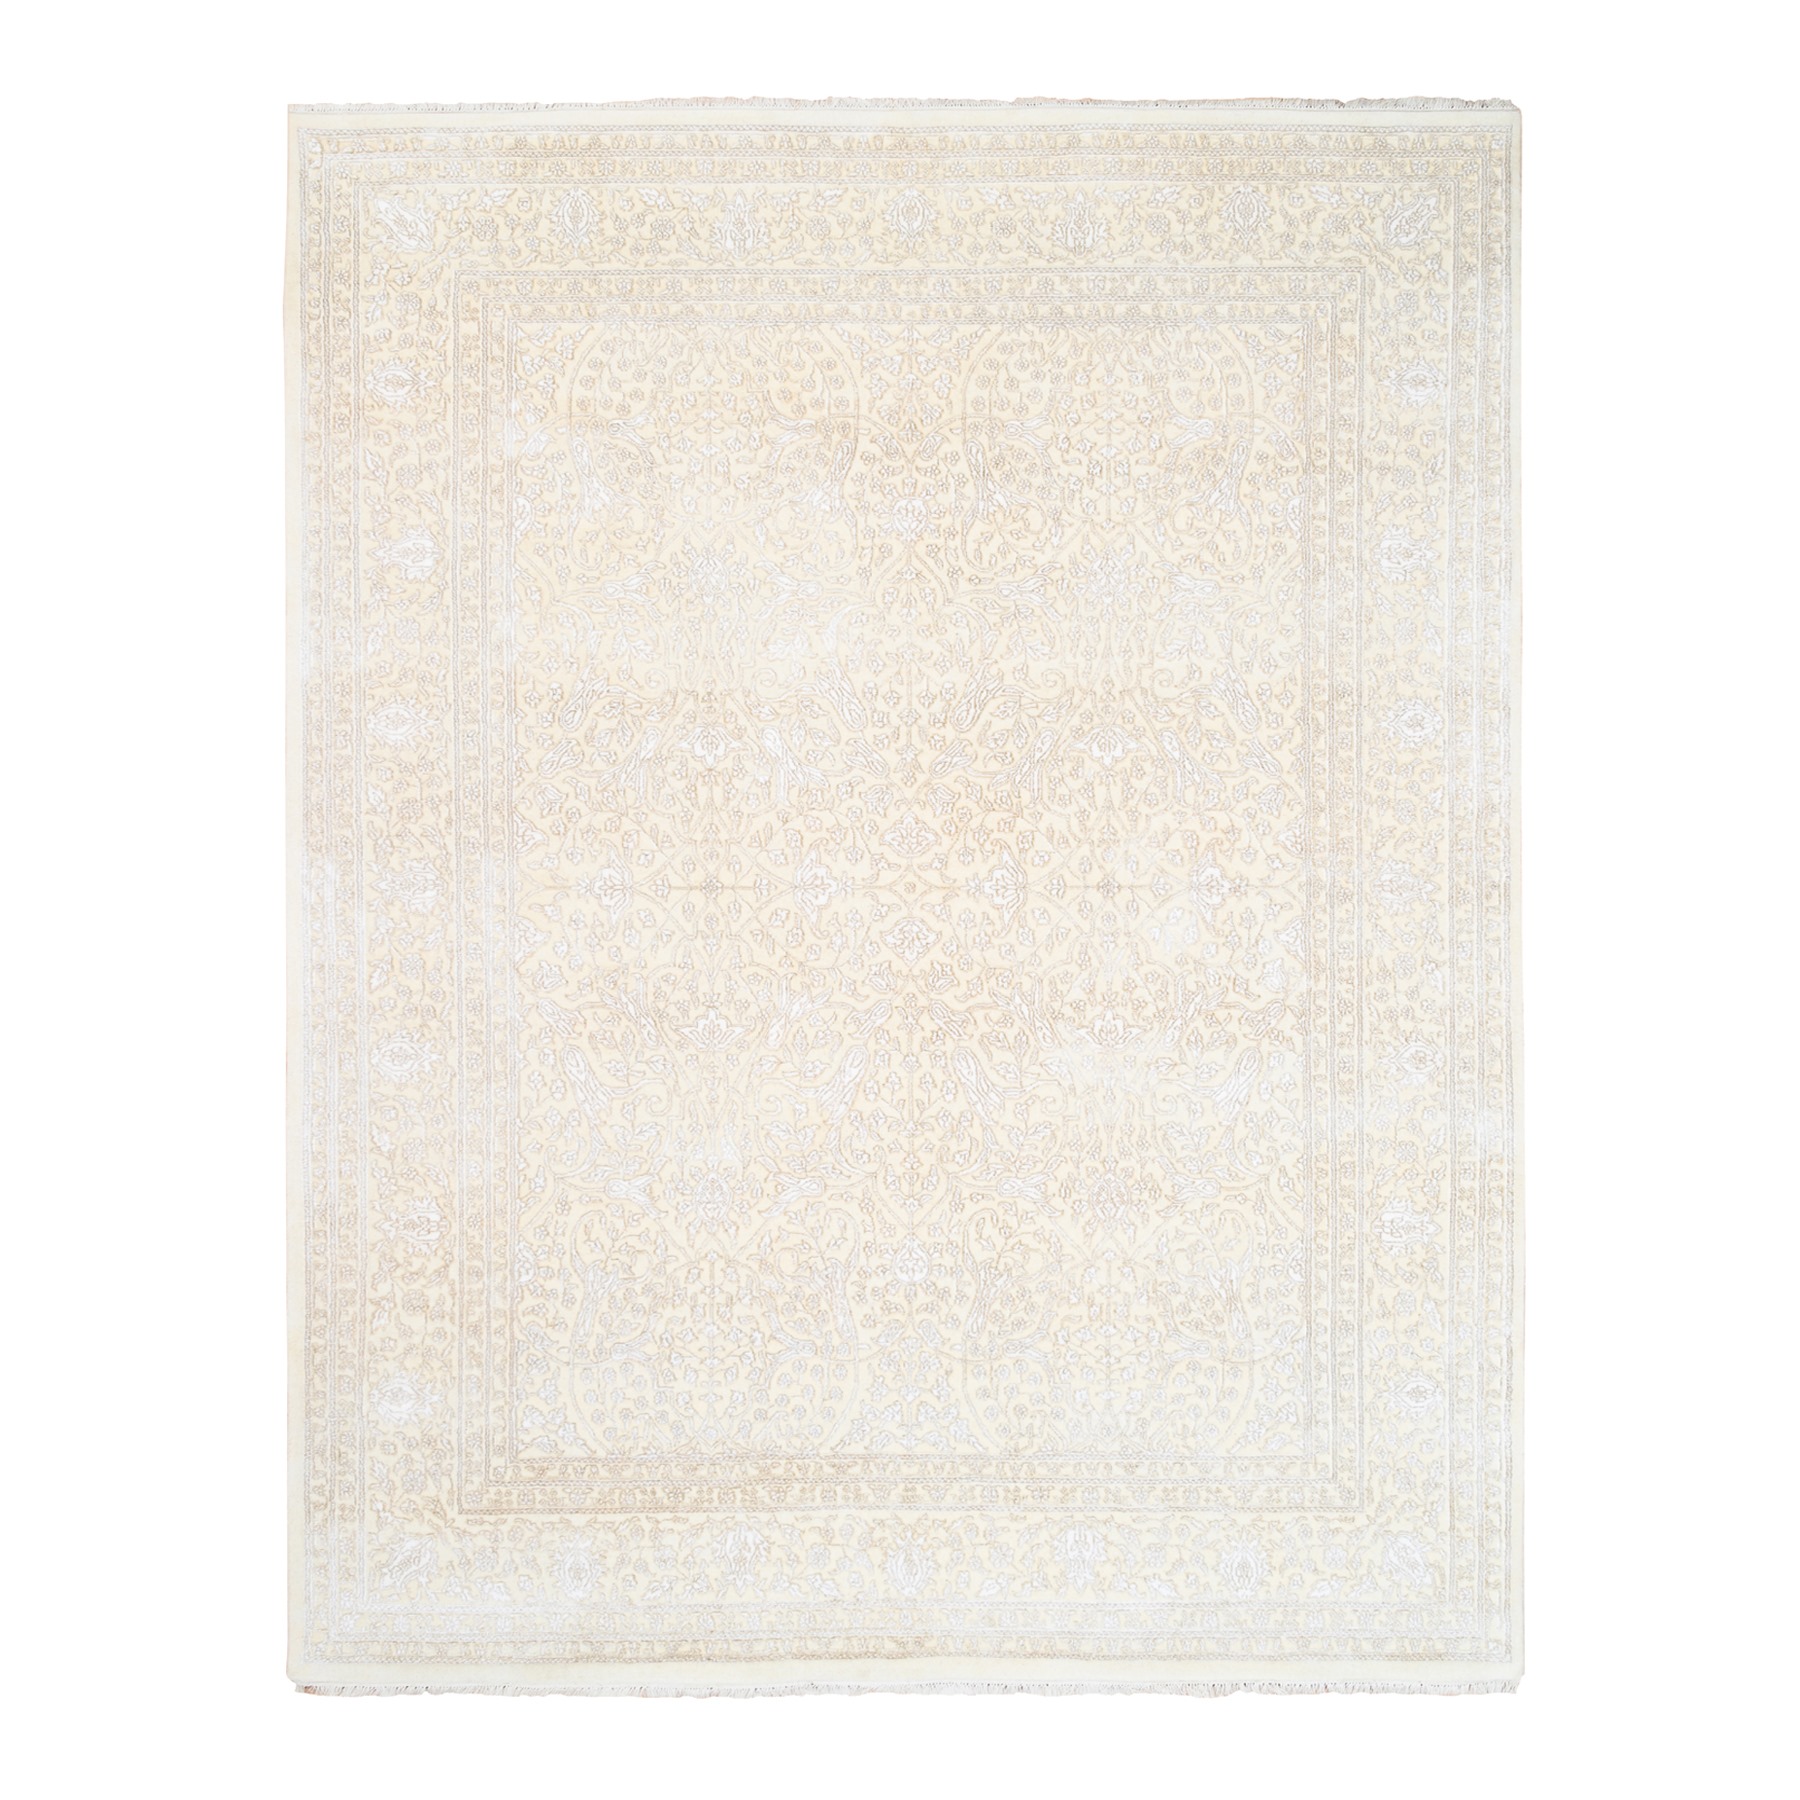 Pirniakan Collection Hand Knotted Ivory Rug No: 1124490